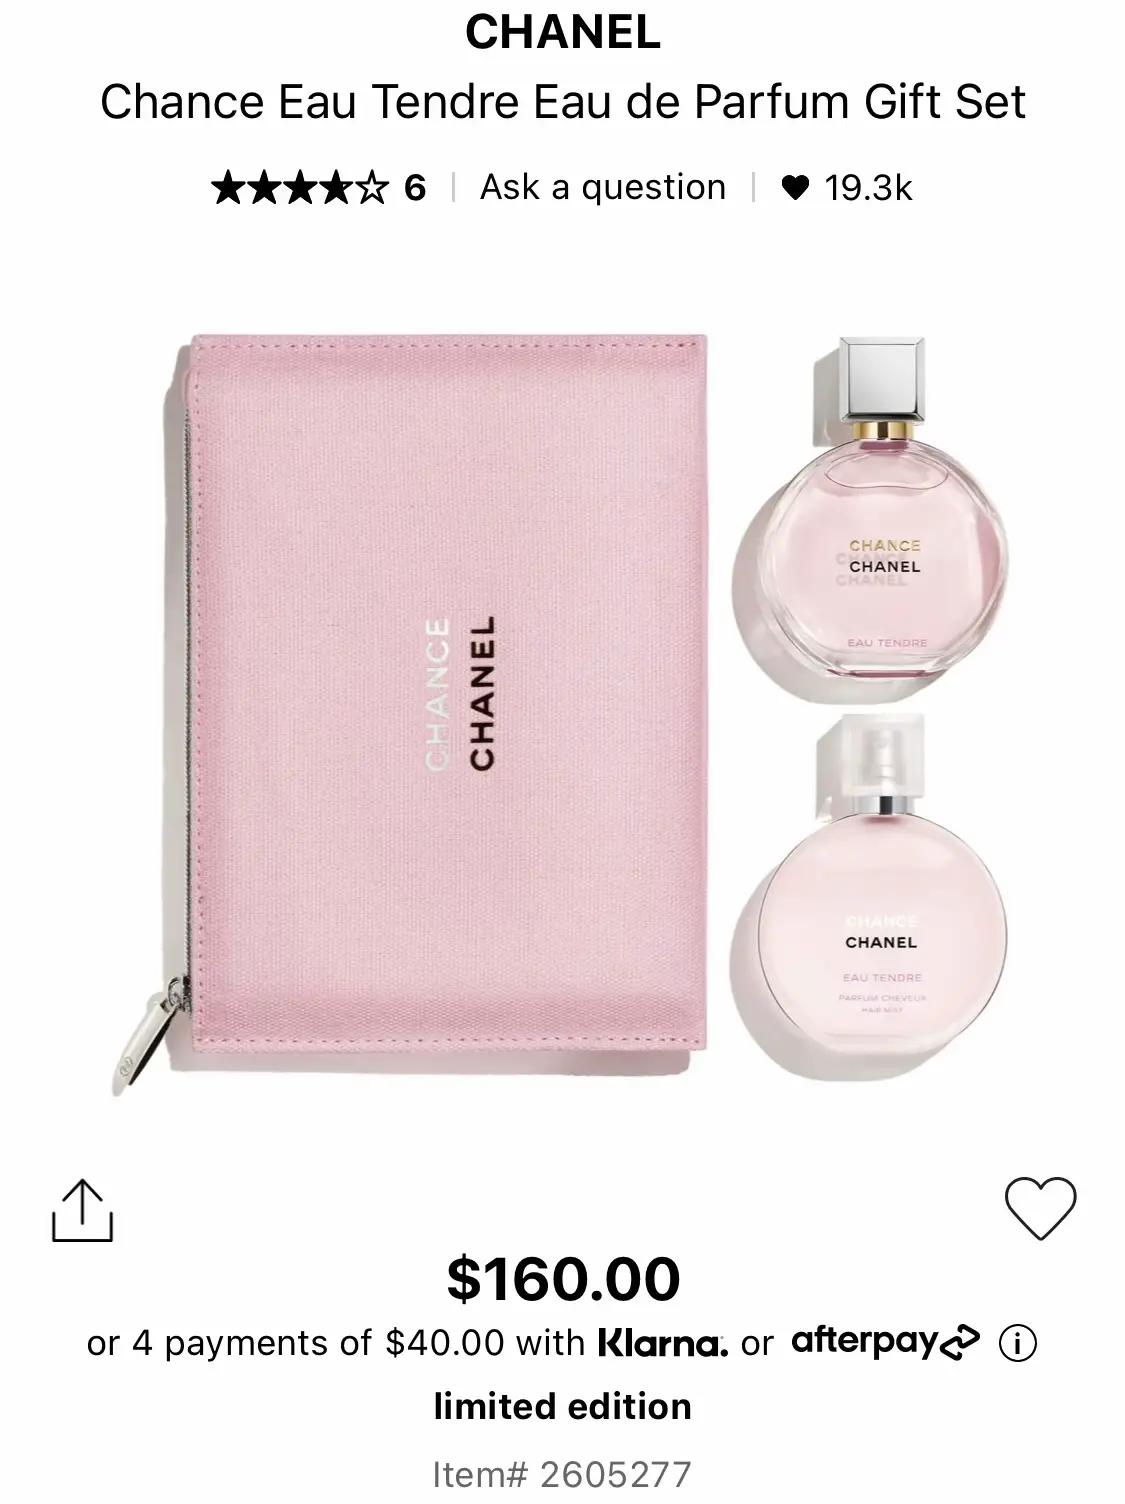 sephora fragrance sets i love, Gallery posted by 🎀kate🎀